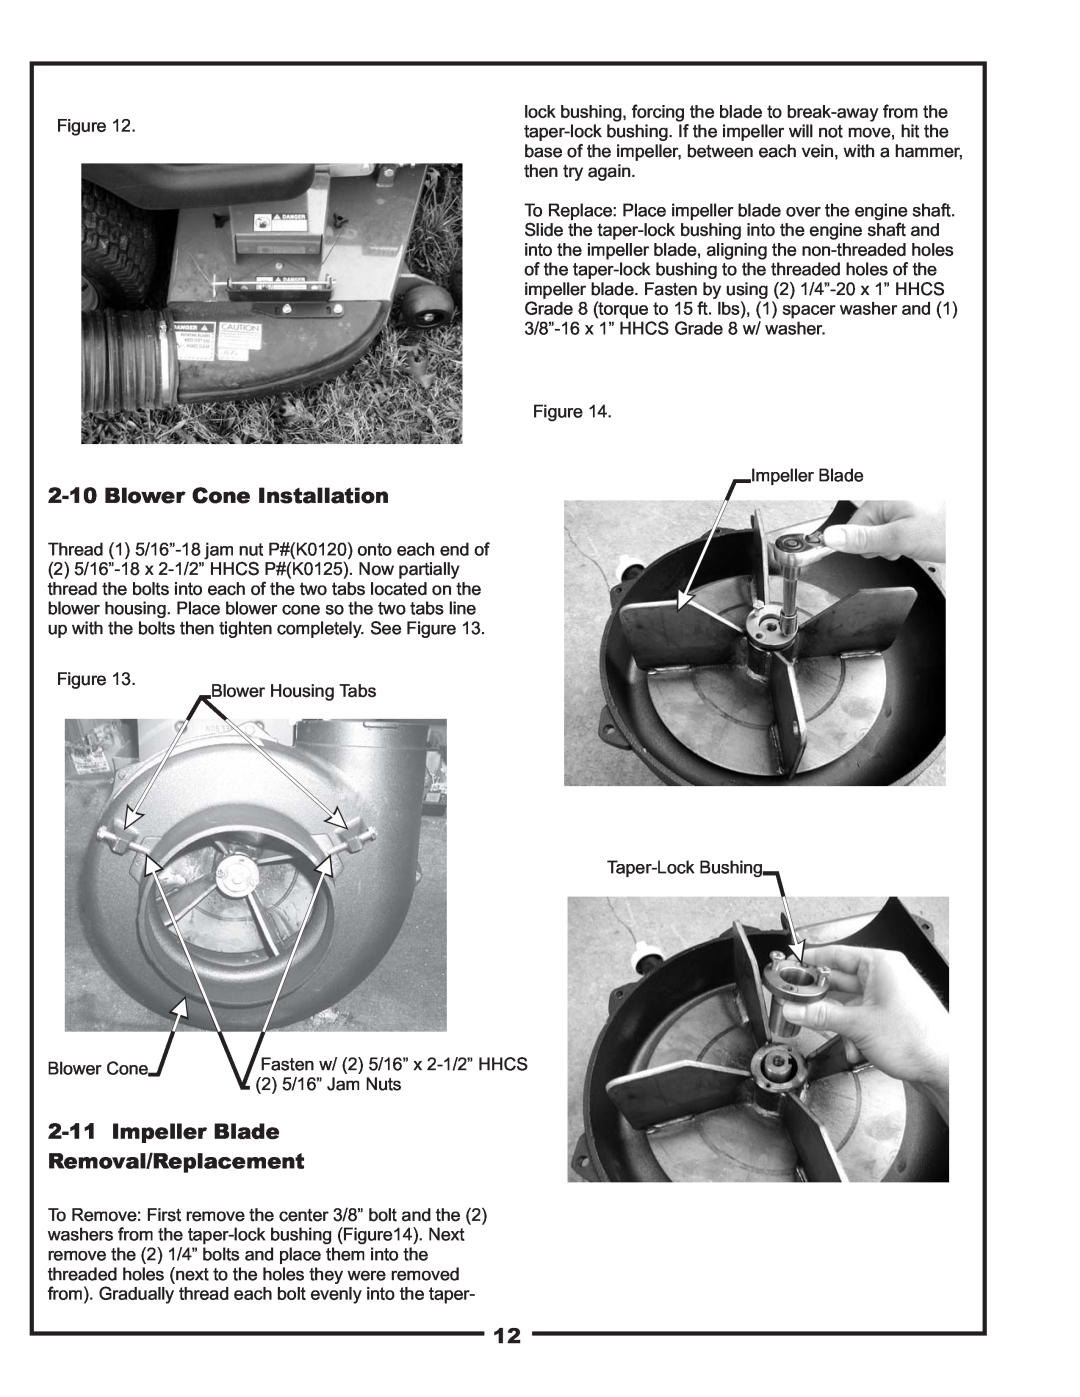 Bad Boy Mowers 48031301 manual 2-10Blower Cone Installation, 2-11Impeller Blade Removal/Replacement 